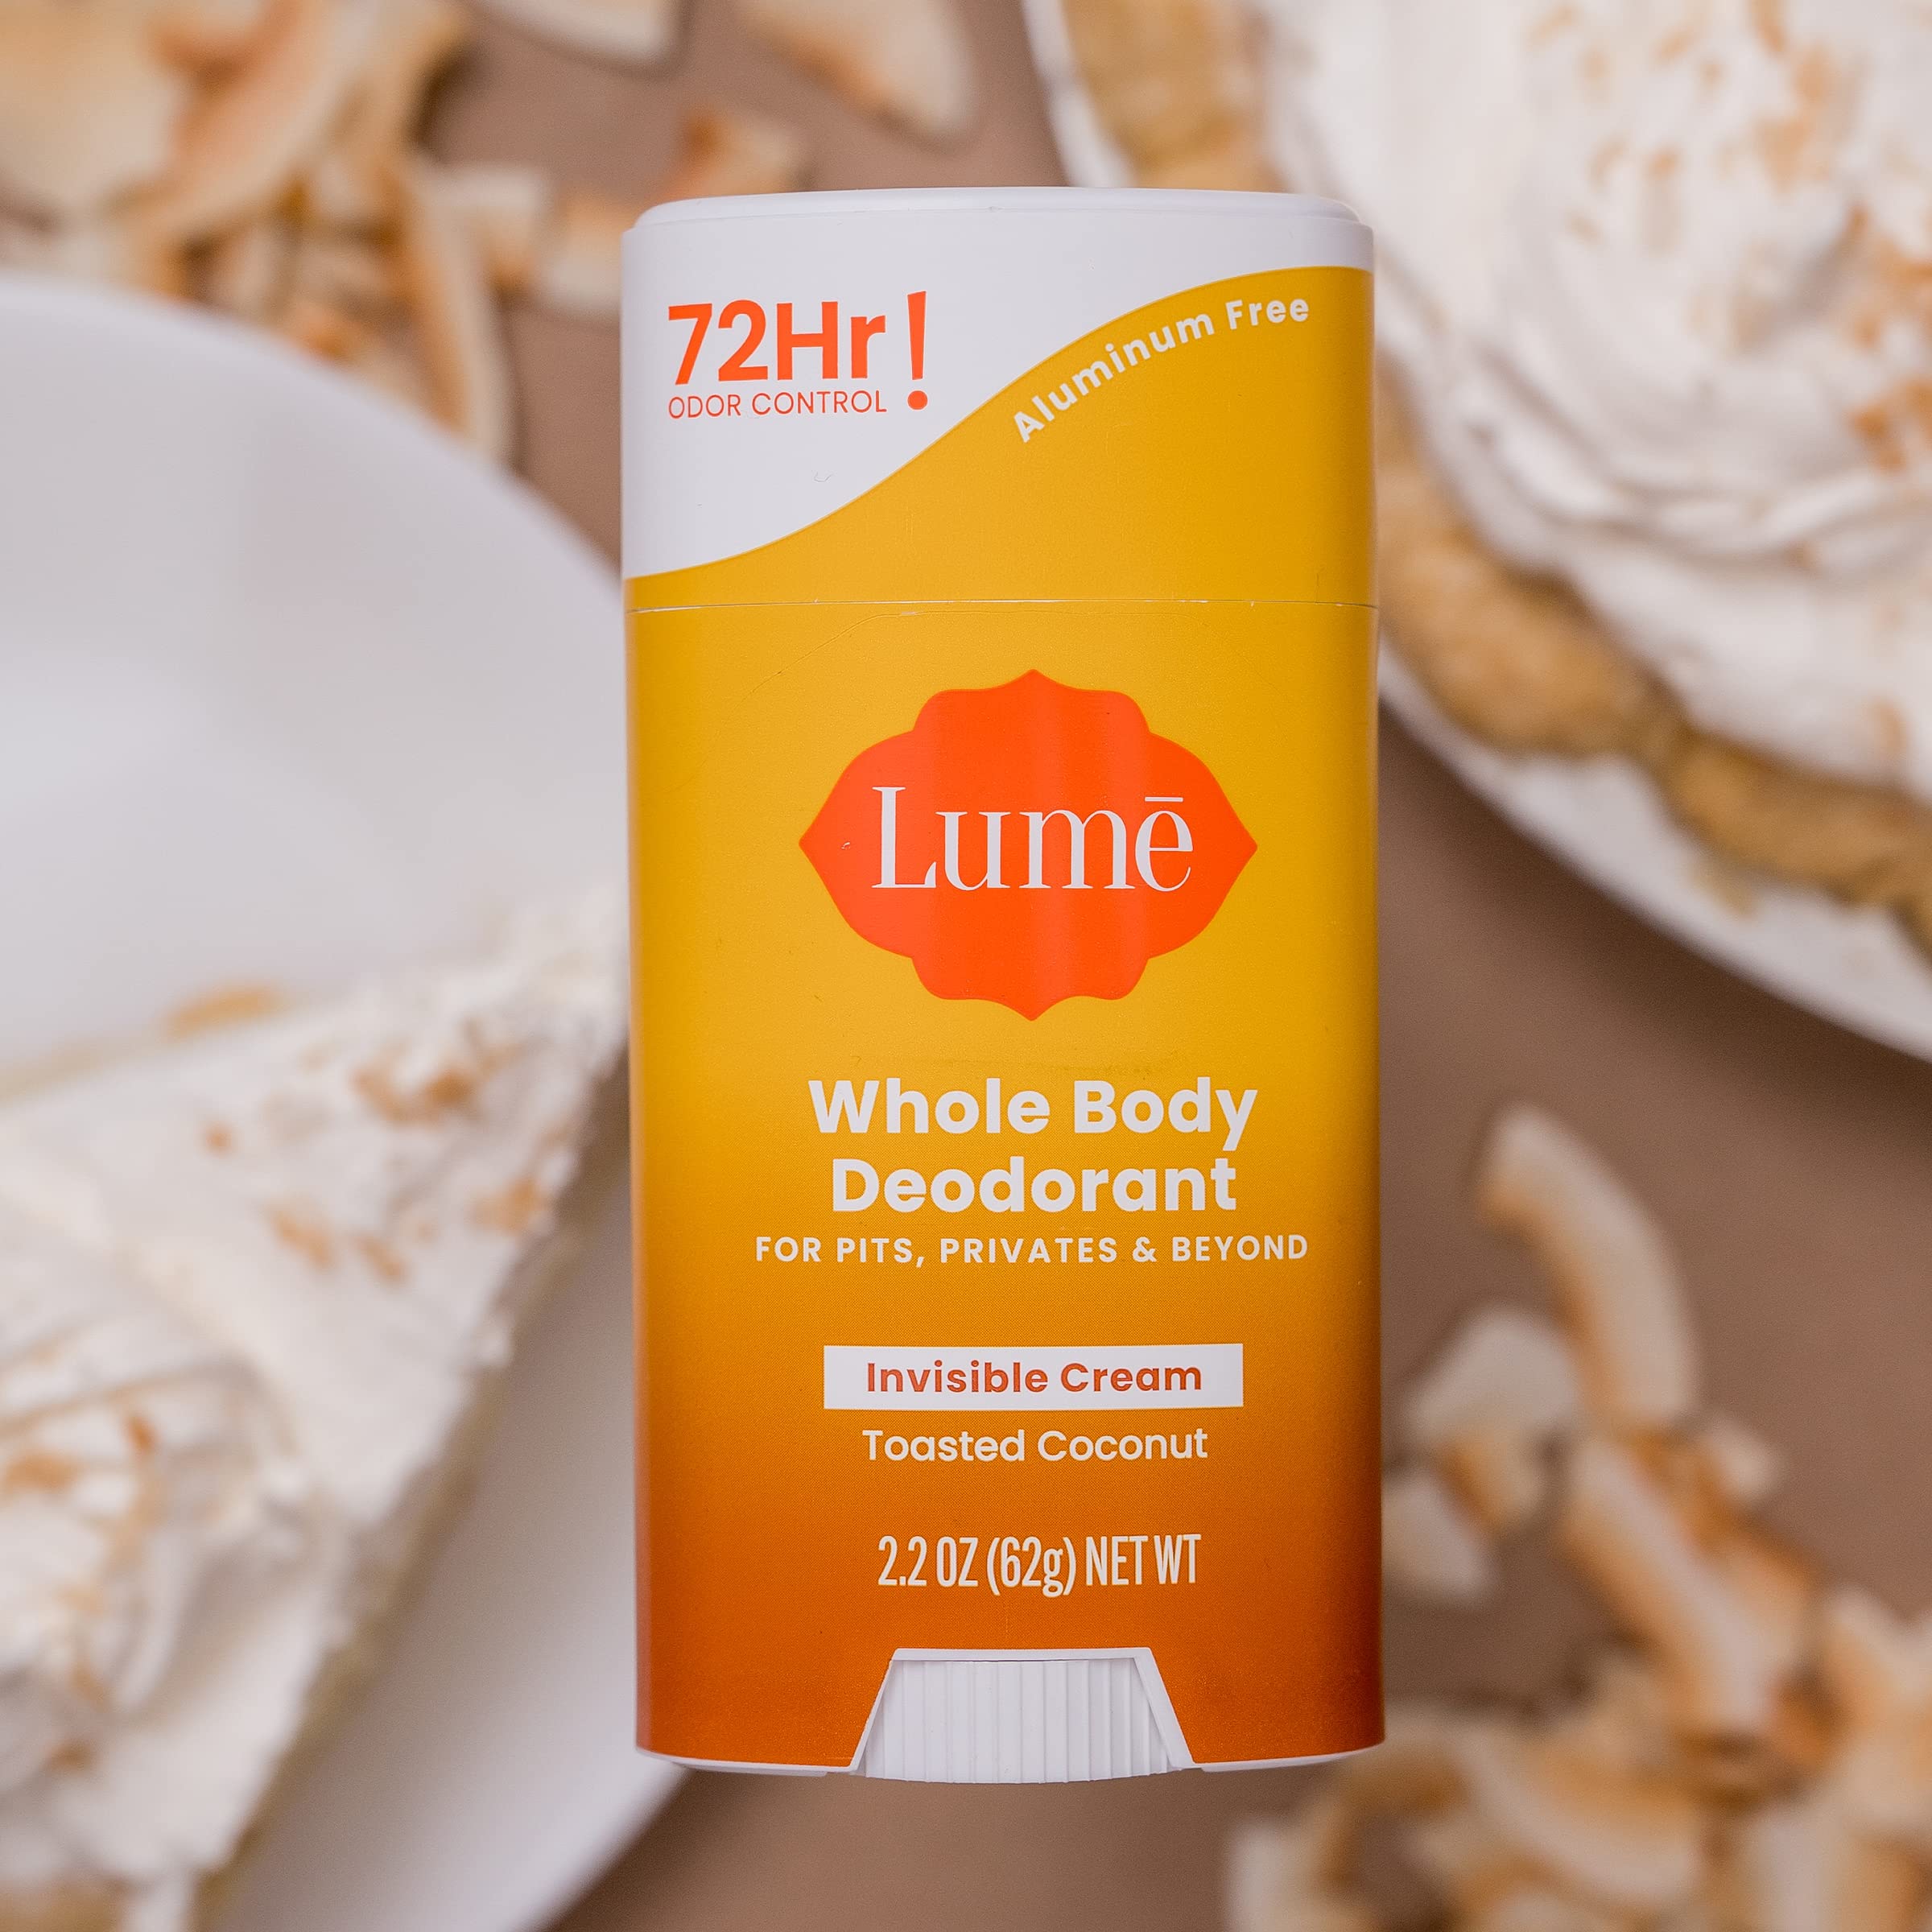 Lume Natural Deodorant - Underarms and Private Parts - Aluminum-Free, Baking Soda-Free, Hypoallergenic, and Safe For Sensitive Skin - 2.2 Ounce Stick (Coconut Crush)